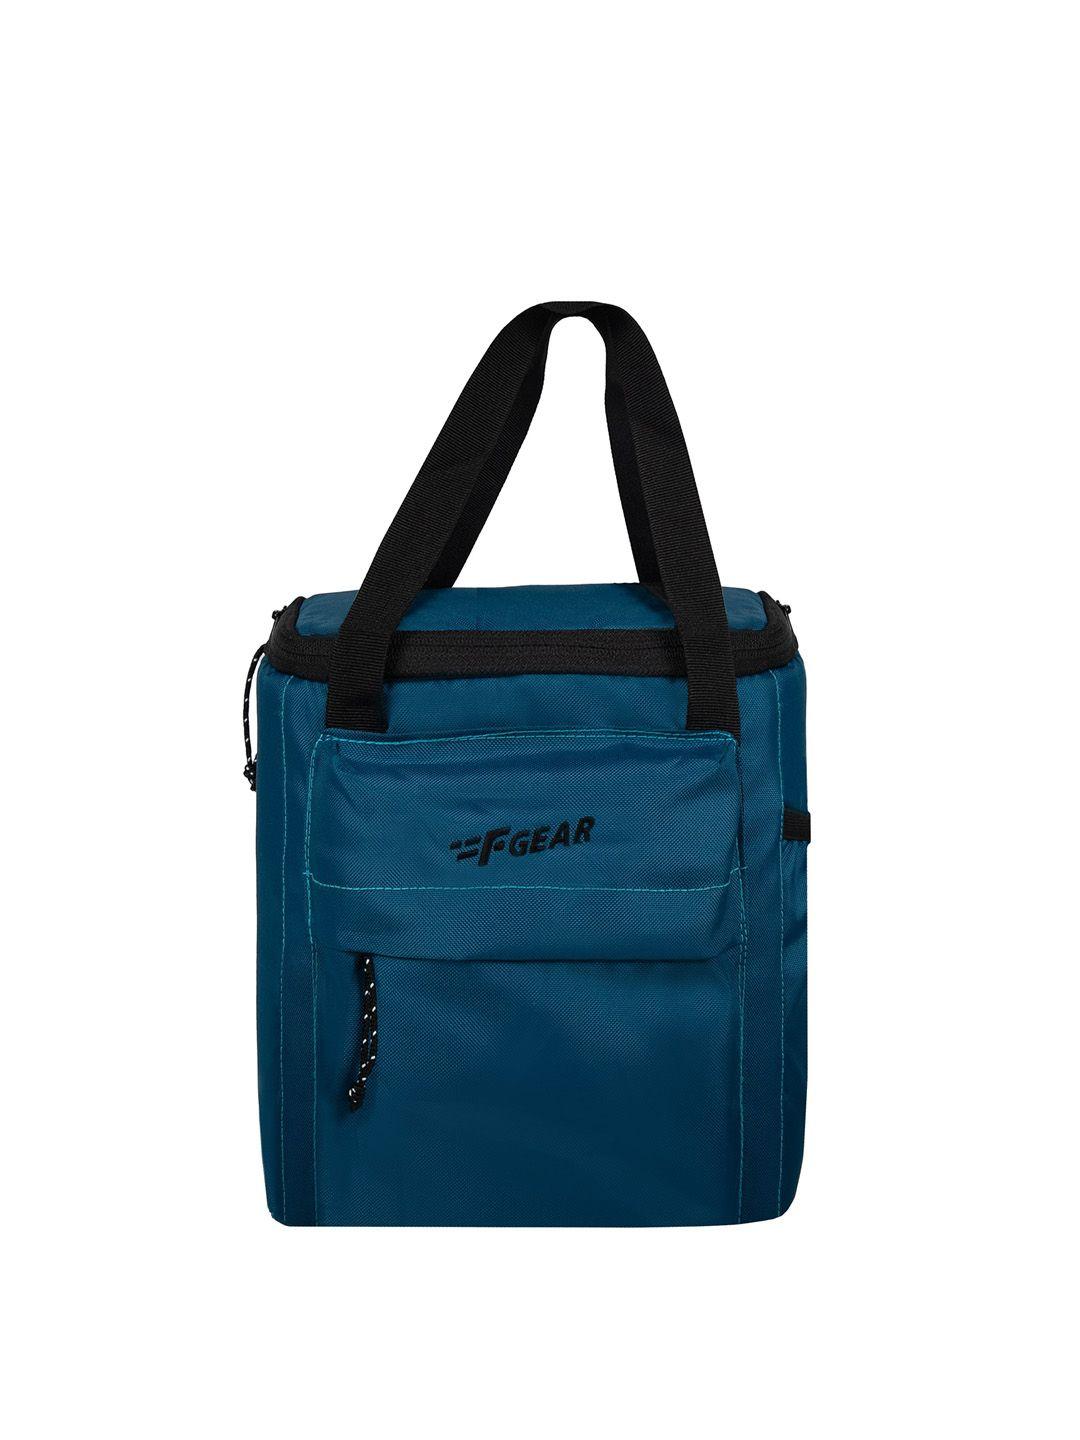 f gear hoover water resistant lunch bag